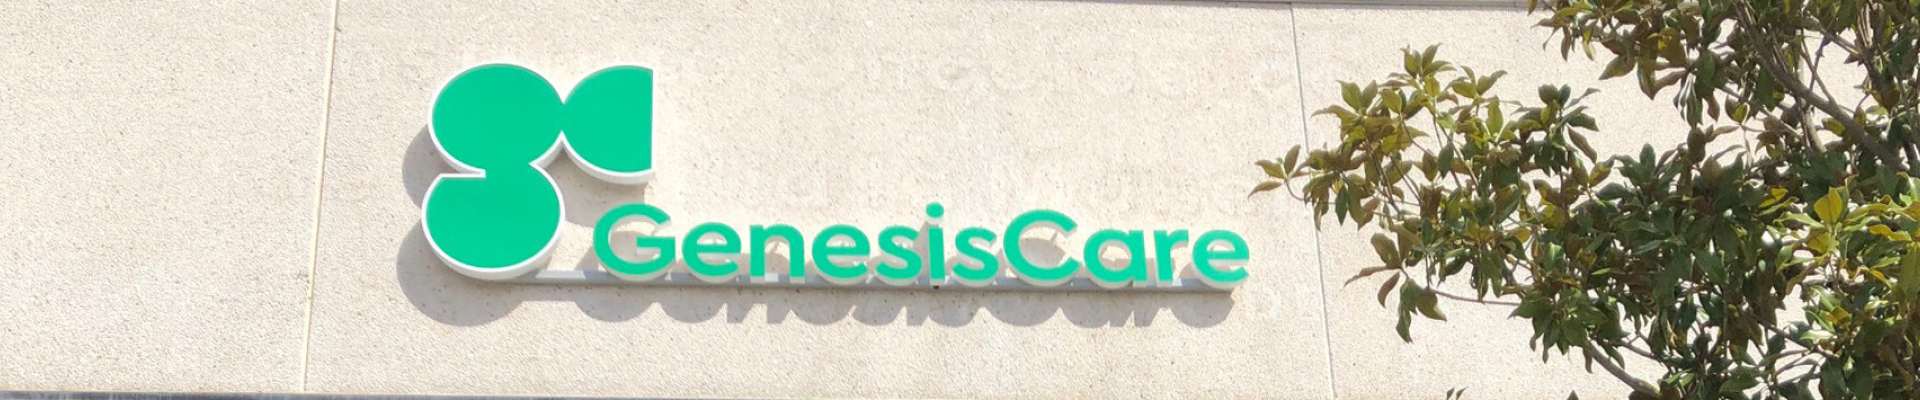 New corporate brand identity implemented across 95 sites for Genesis Care